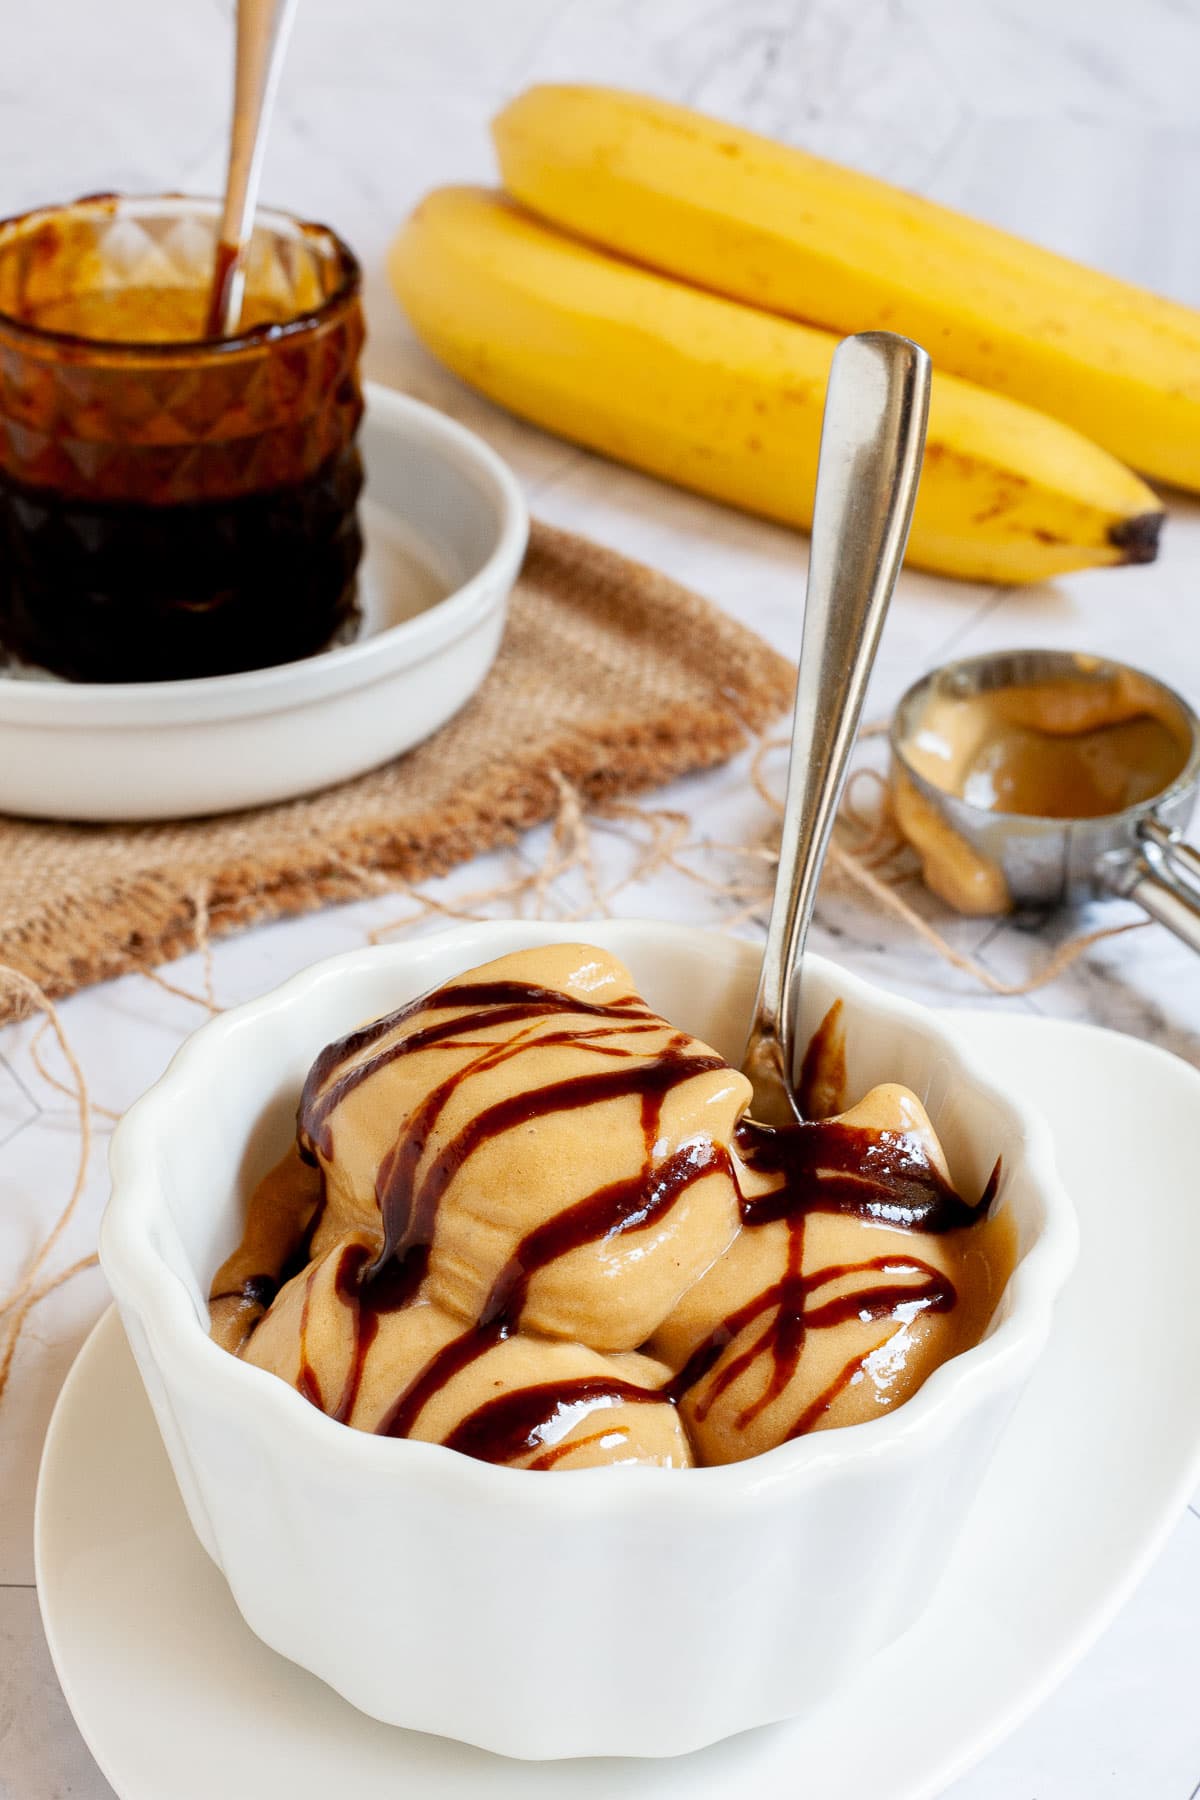 A white bowl of caramel colored ice cream with dark brown caramel drizzle on top. A glass jar of caramel sauce and 2 bananas are in the background. 